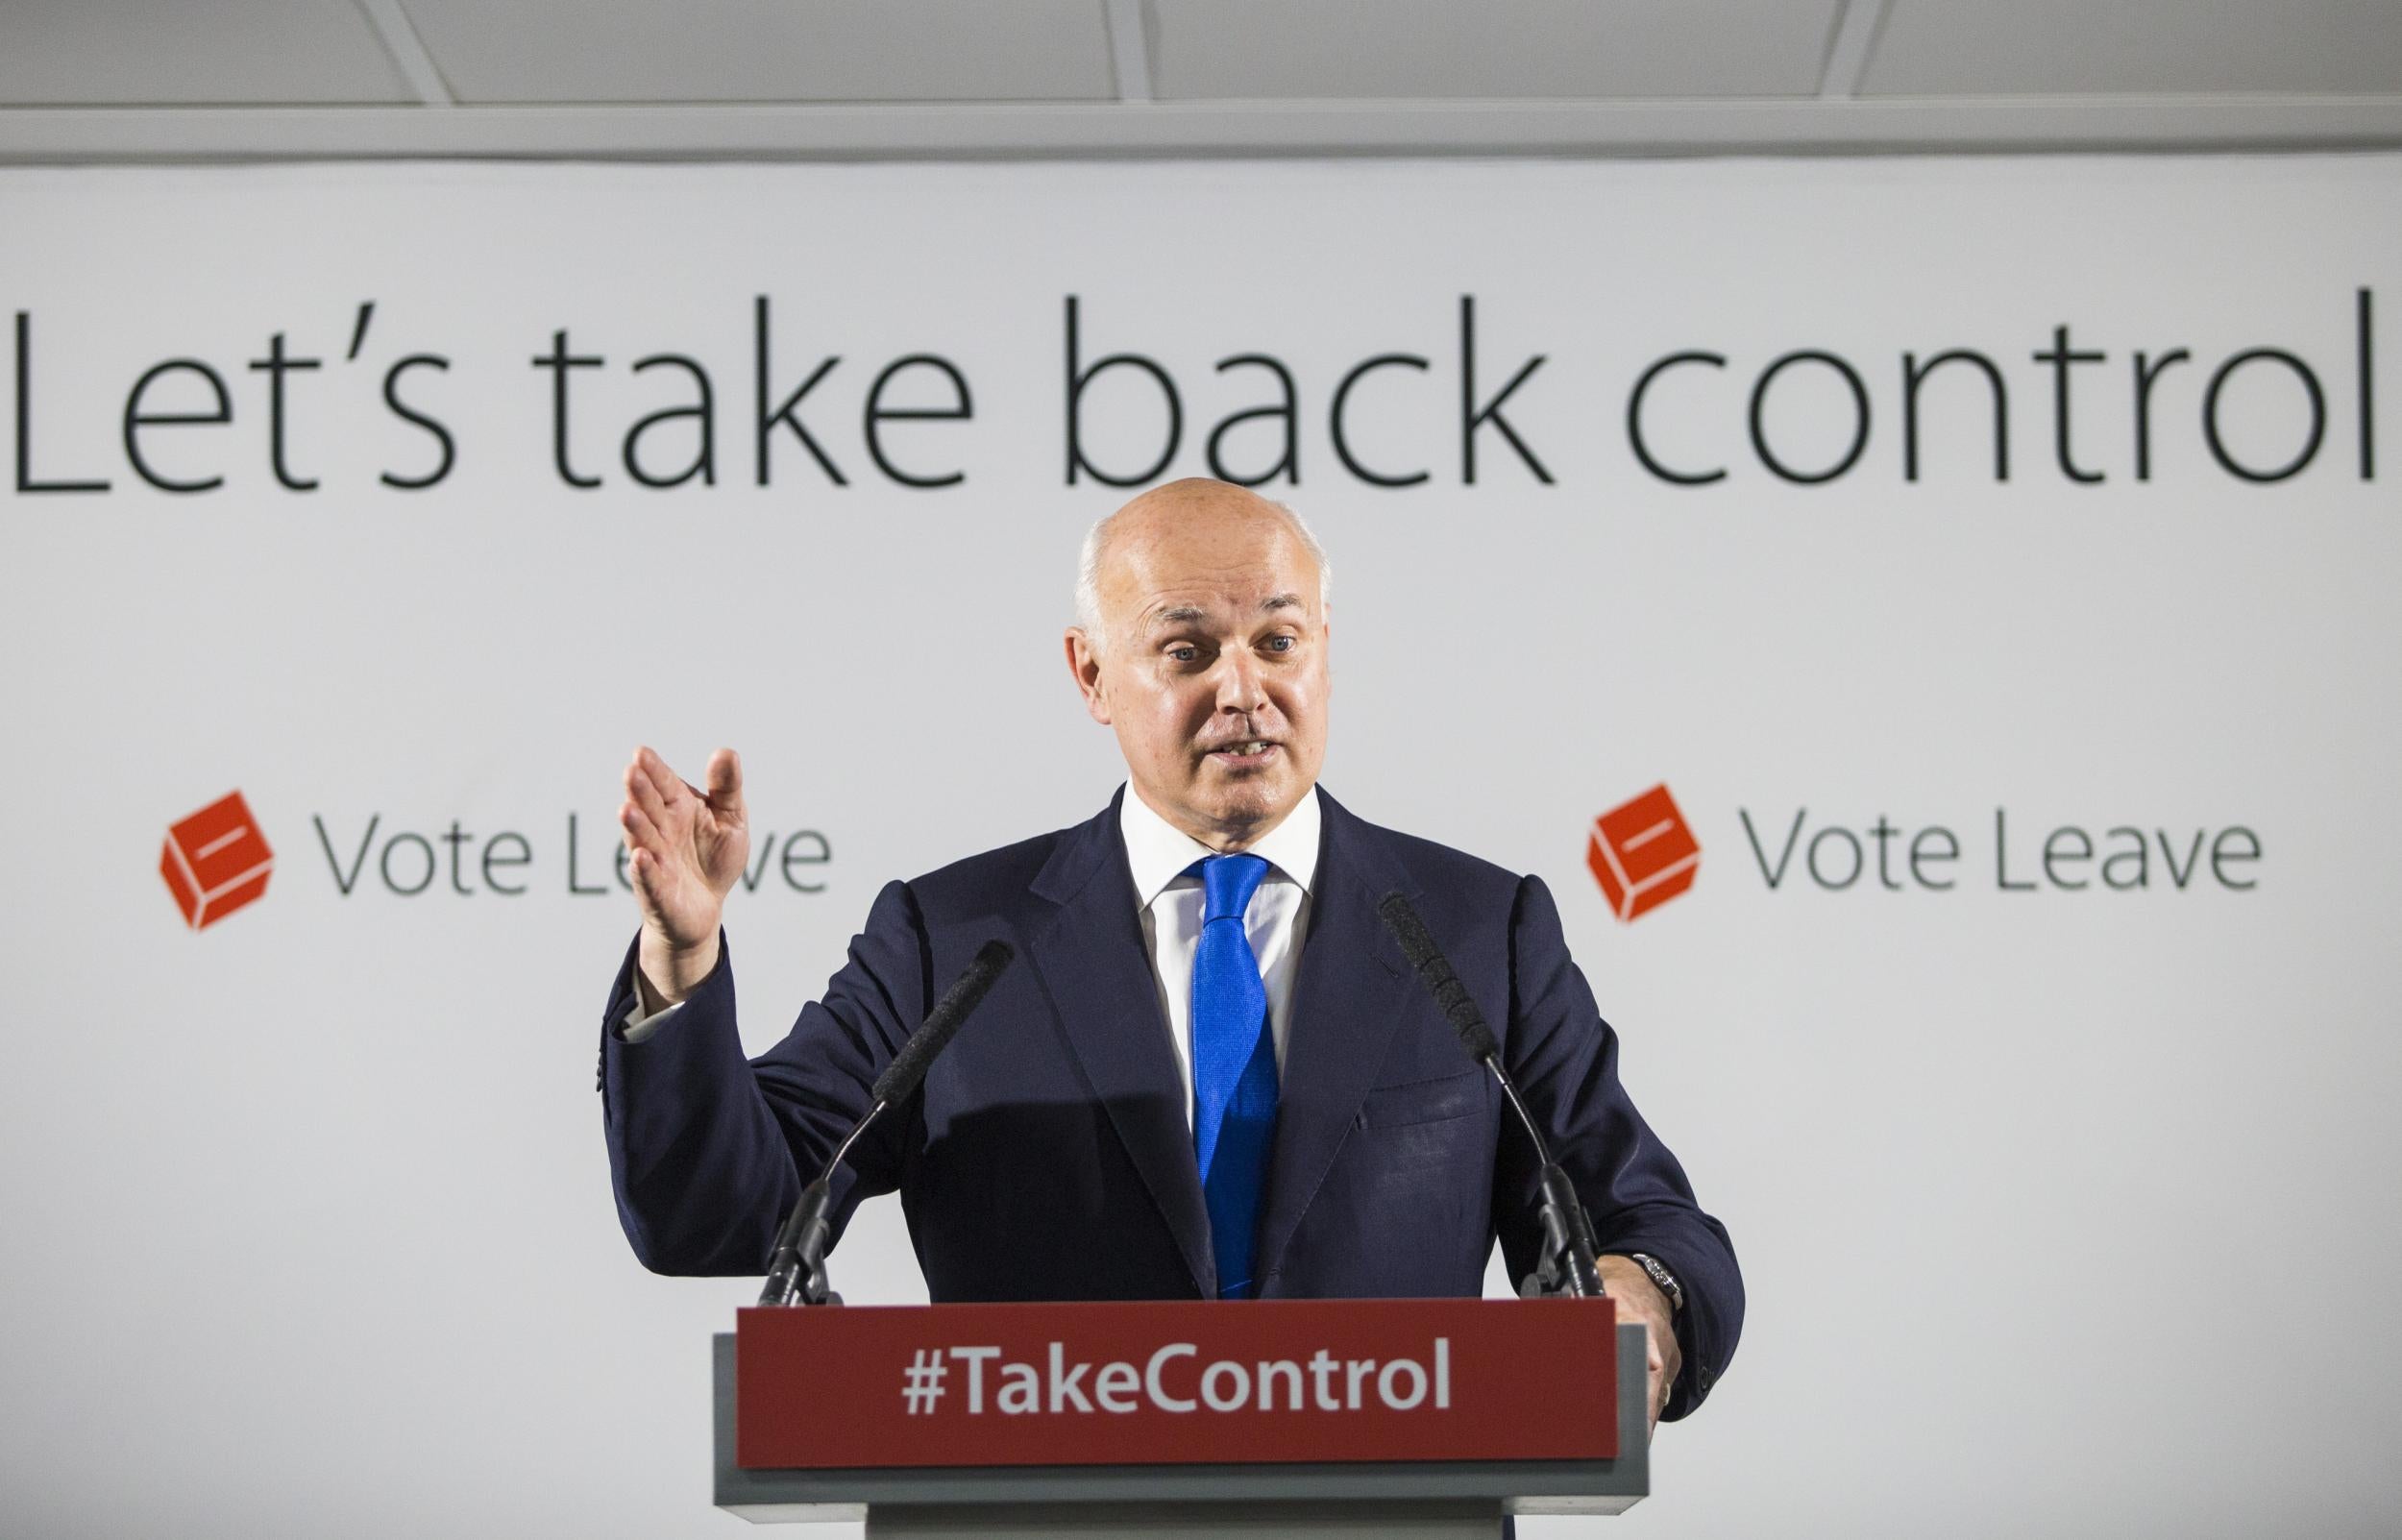 Iain Duncan Smith was a prominent Leave campaigner